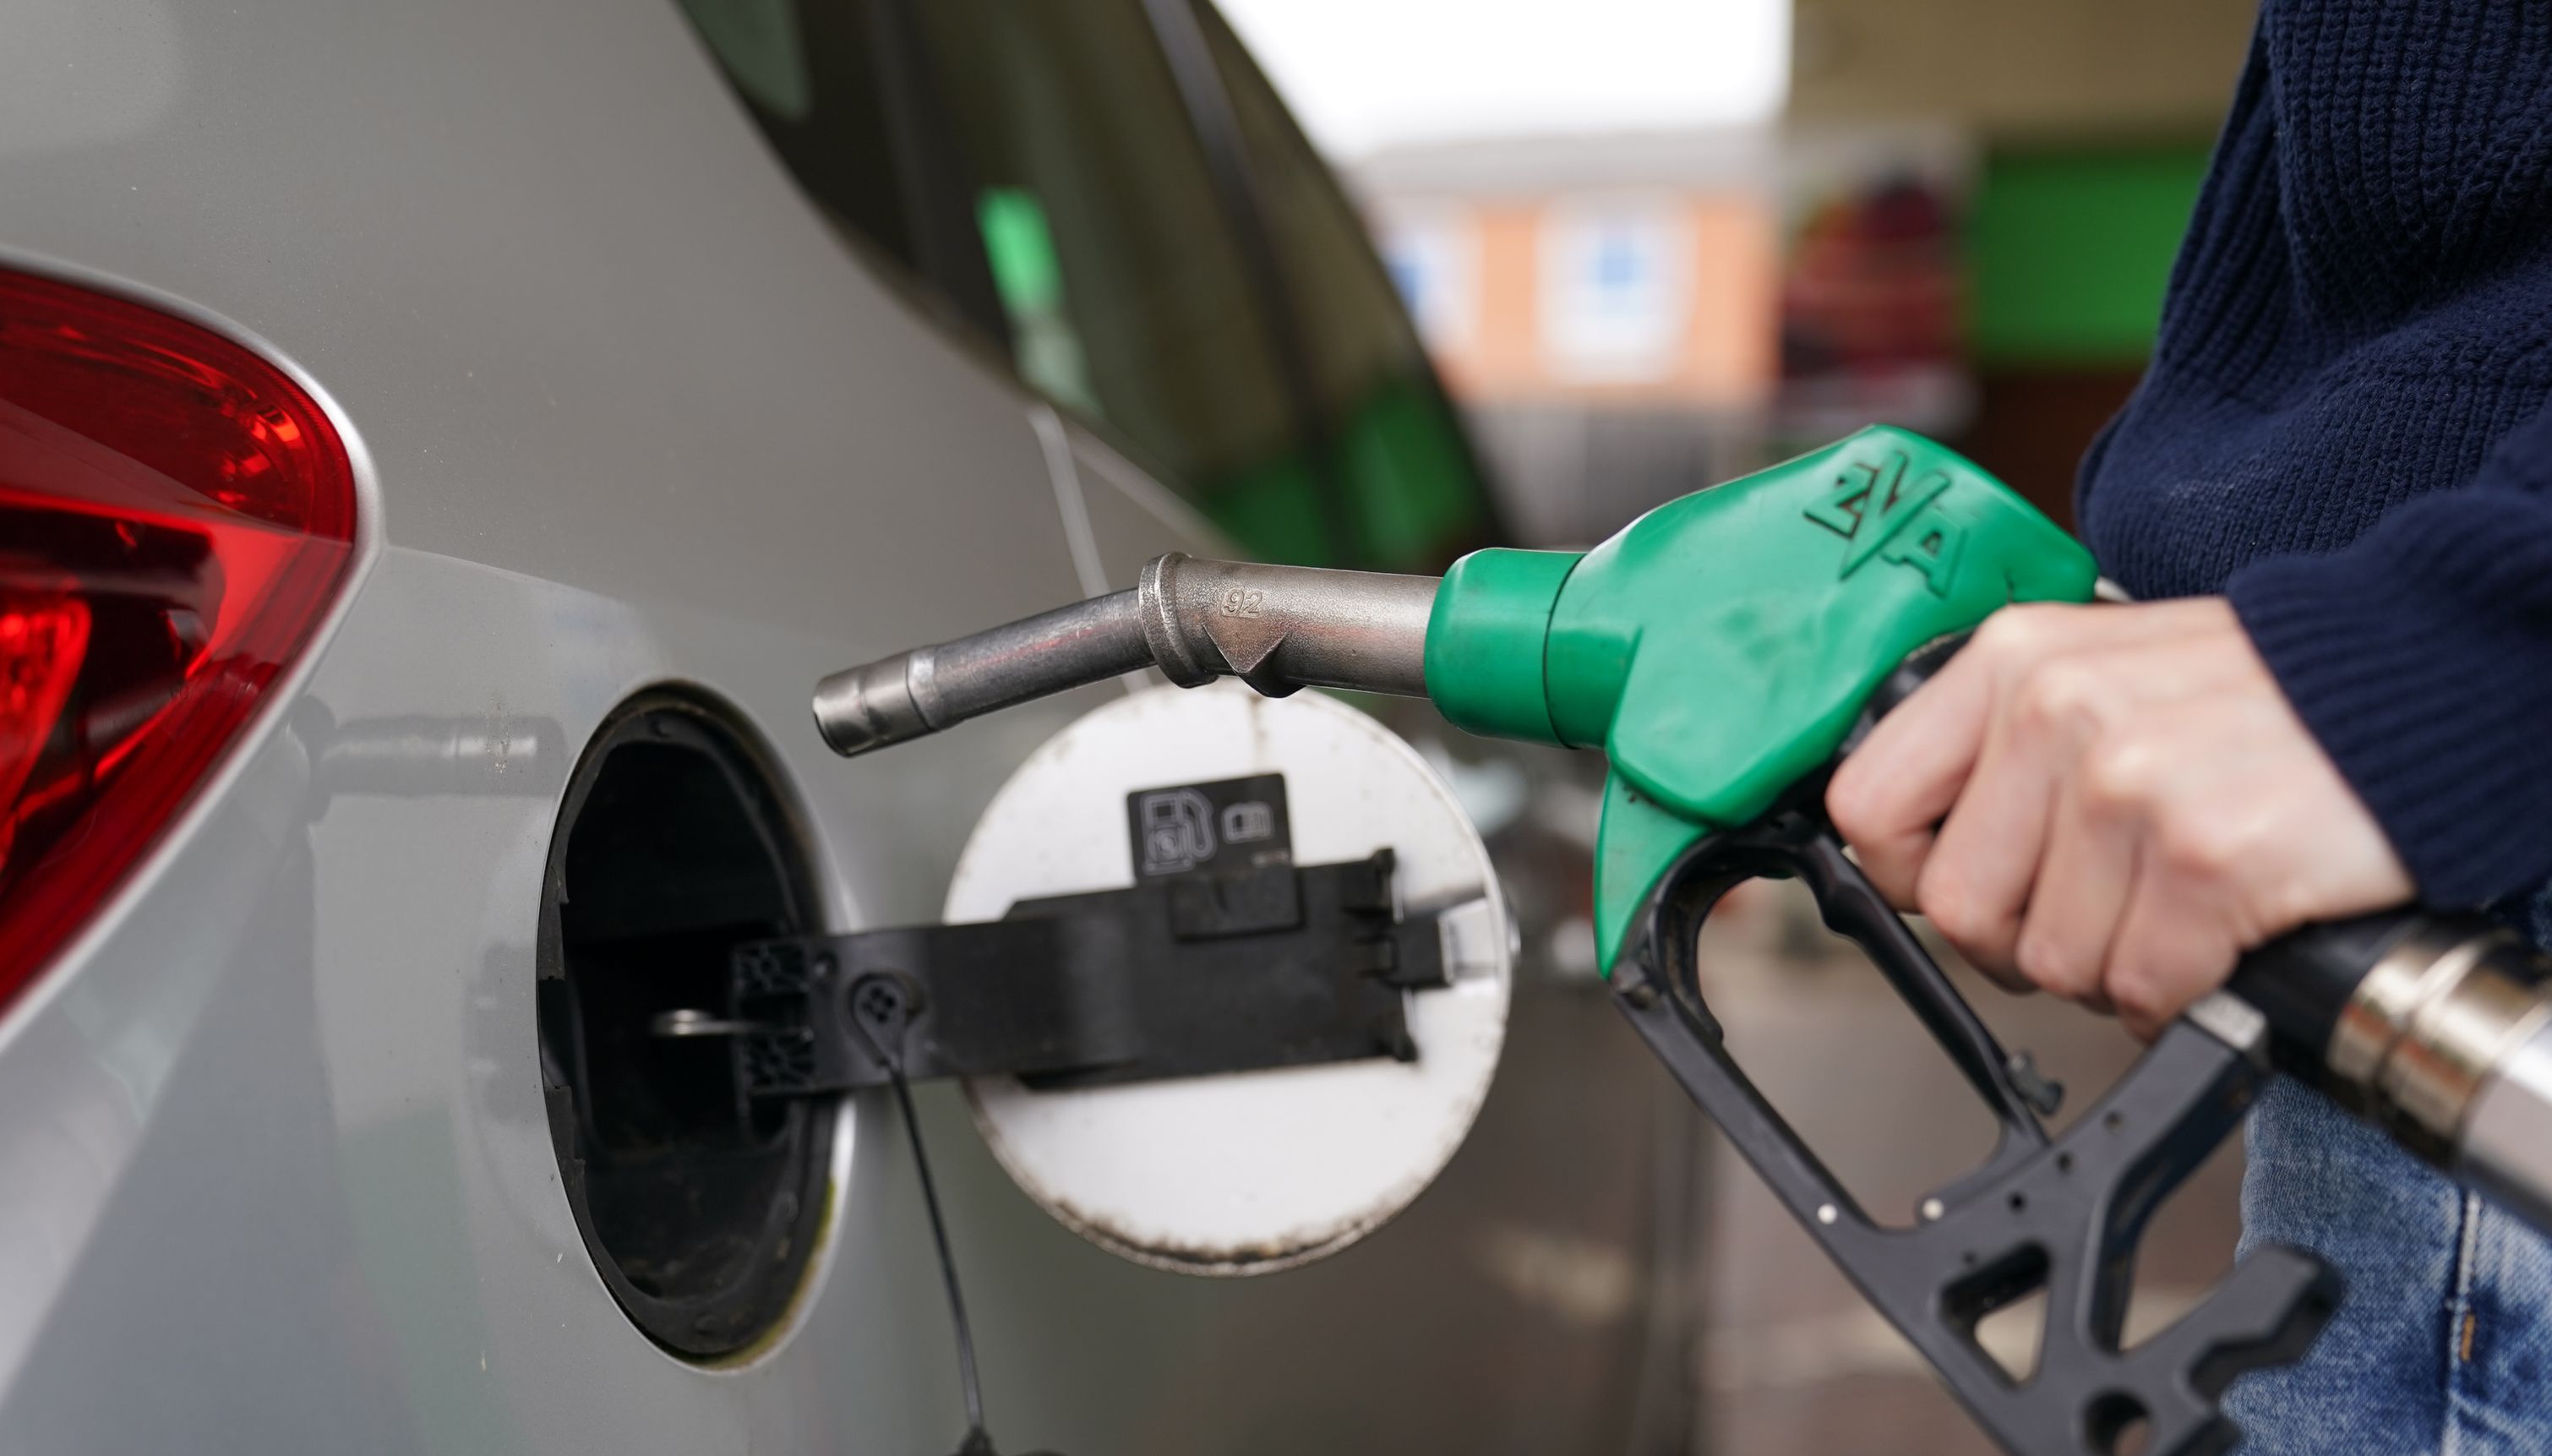 The RAC has warned that petrol prices could rise further.